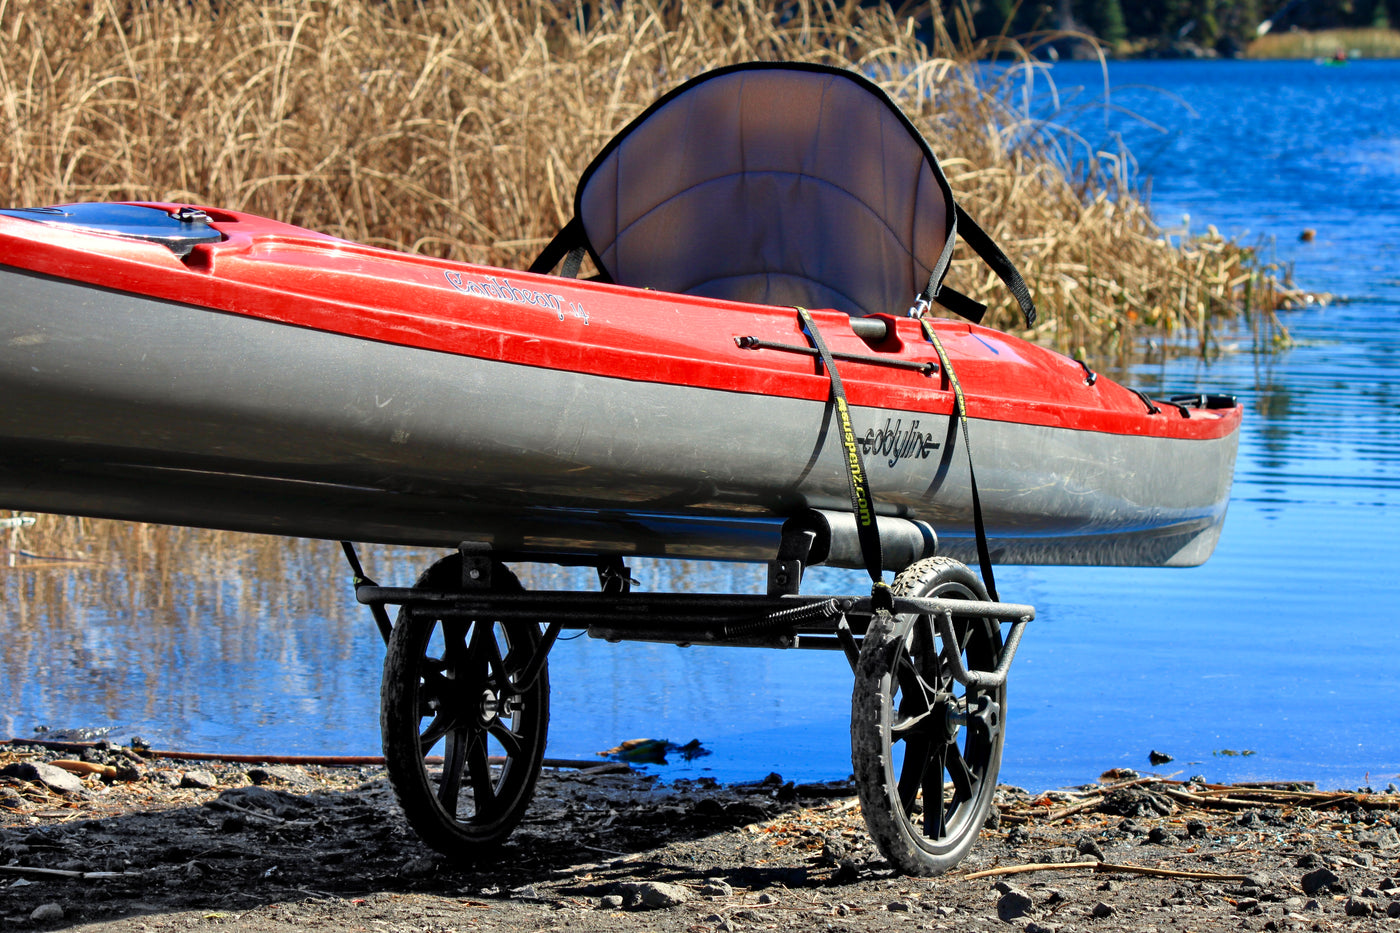 Kayak strapped on the all-terrain cart near a lake.